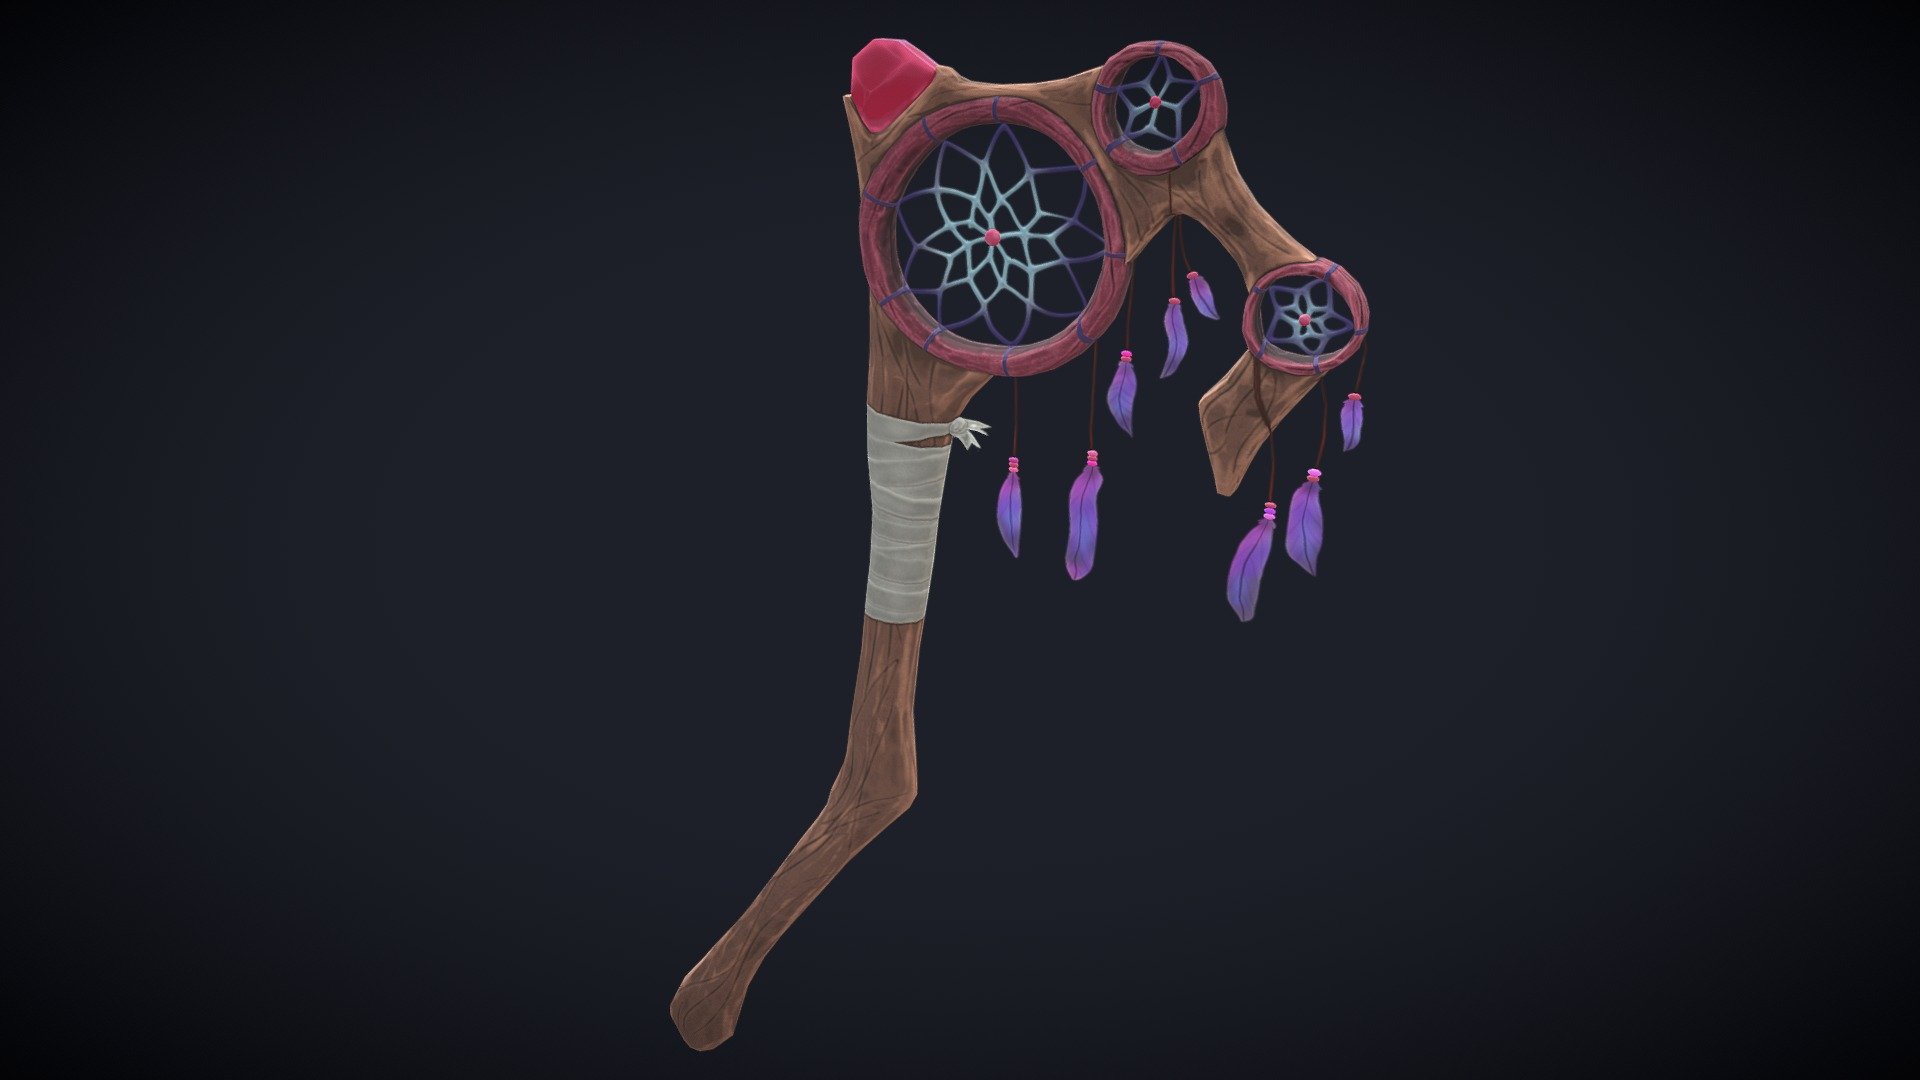 Concept artist - Nightmare Owly

Artstation - https://www.artstation.com/nightmareowly

VK - https://vk.com/nightmareowly

TT - https://www.tiktok.com/@nightmareowly

Insta - https://www.instagram.com/nightmareowly/ - Stylized staff of sleep - Download Free 3D model by stayalivedudexxx 3d model